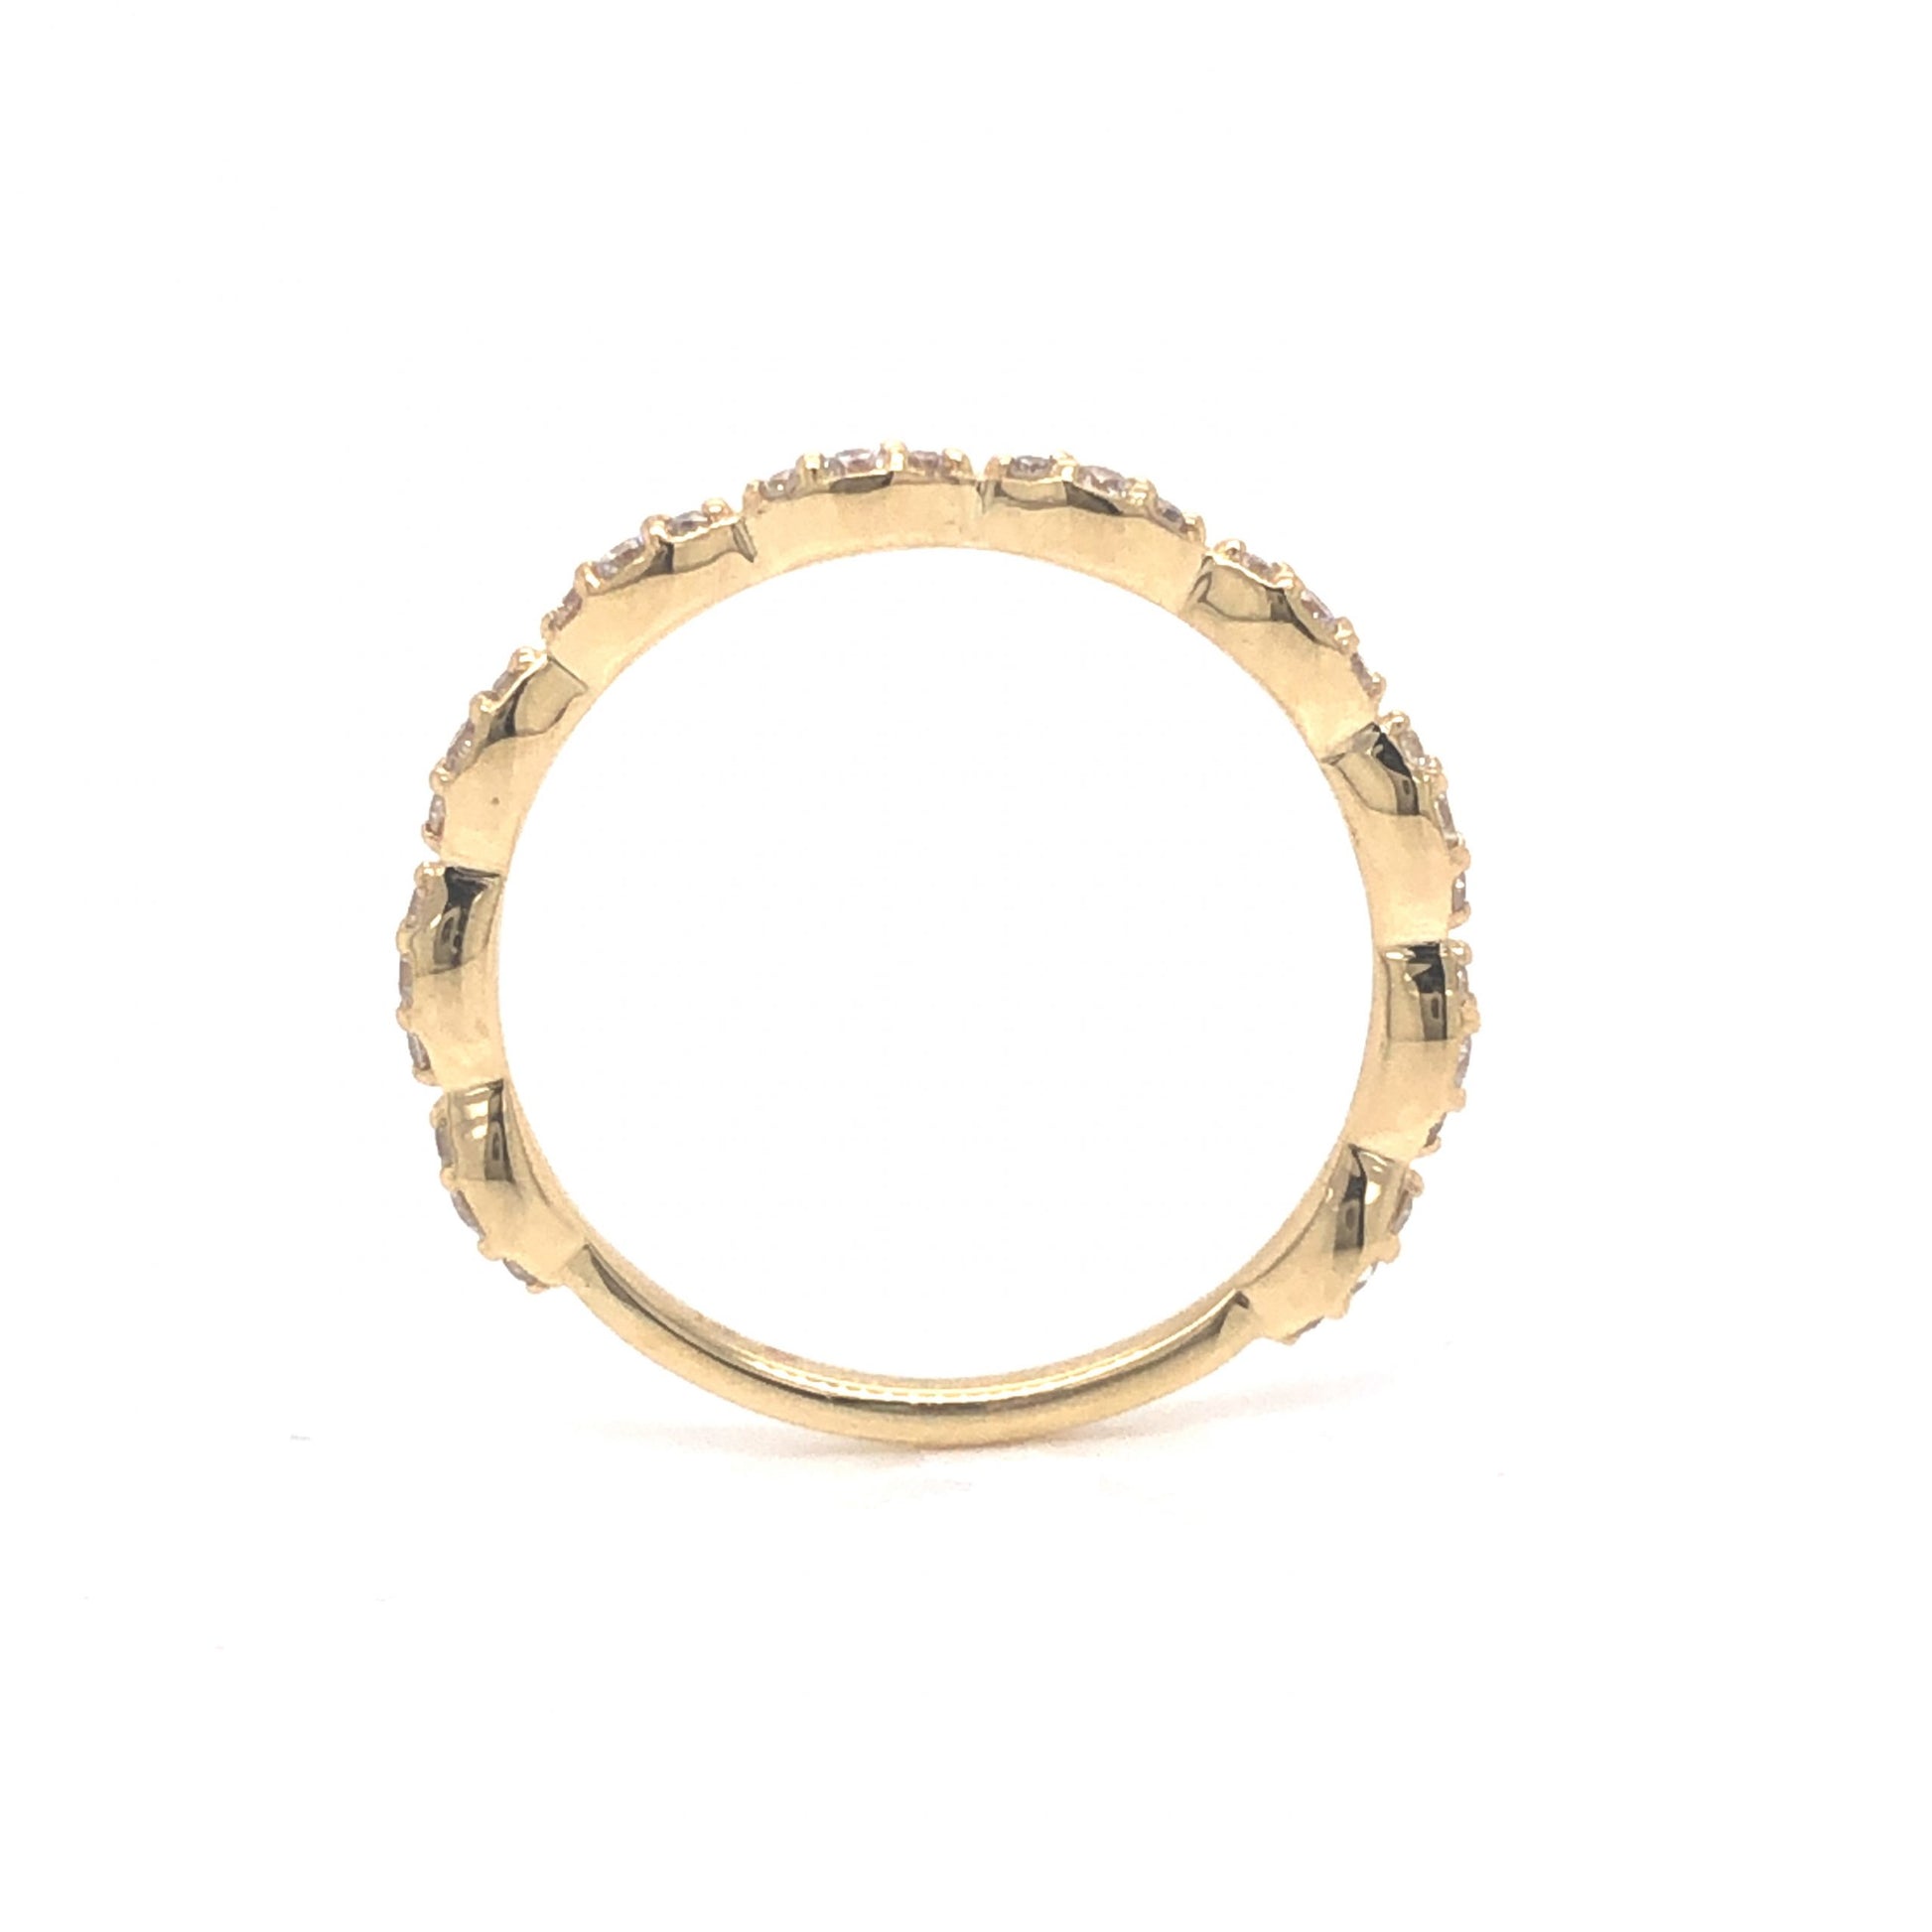 Thin .24 Half-Eternity Diamond Wedding Band in 14k Yellow GoldComposition: Platinum Ring Size: 6.5 Total Diamond Weight: .24ct Total Gram Weight: 1.2 g Inscription: 14k
      